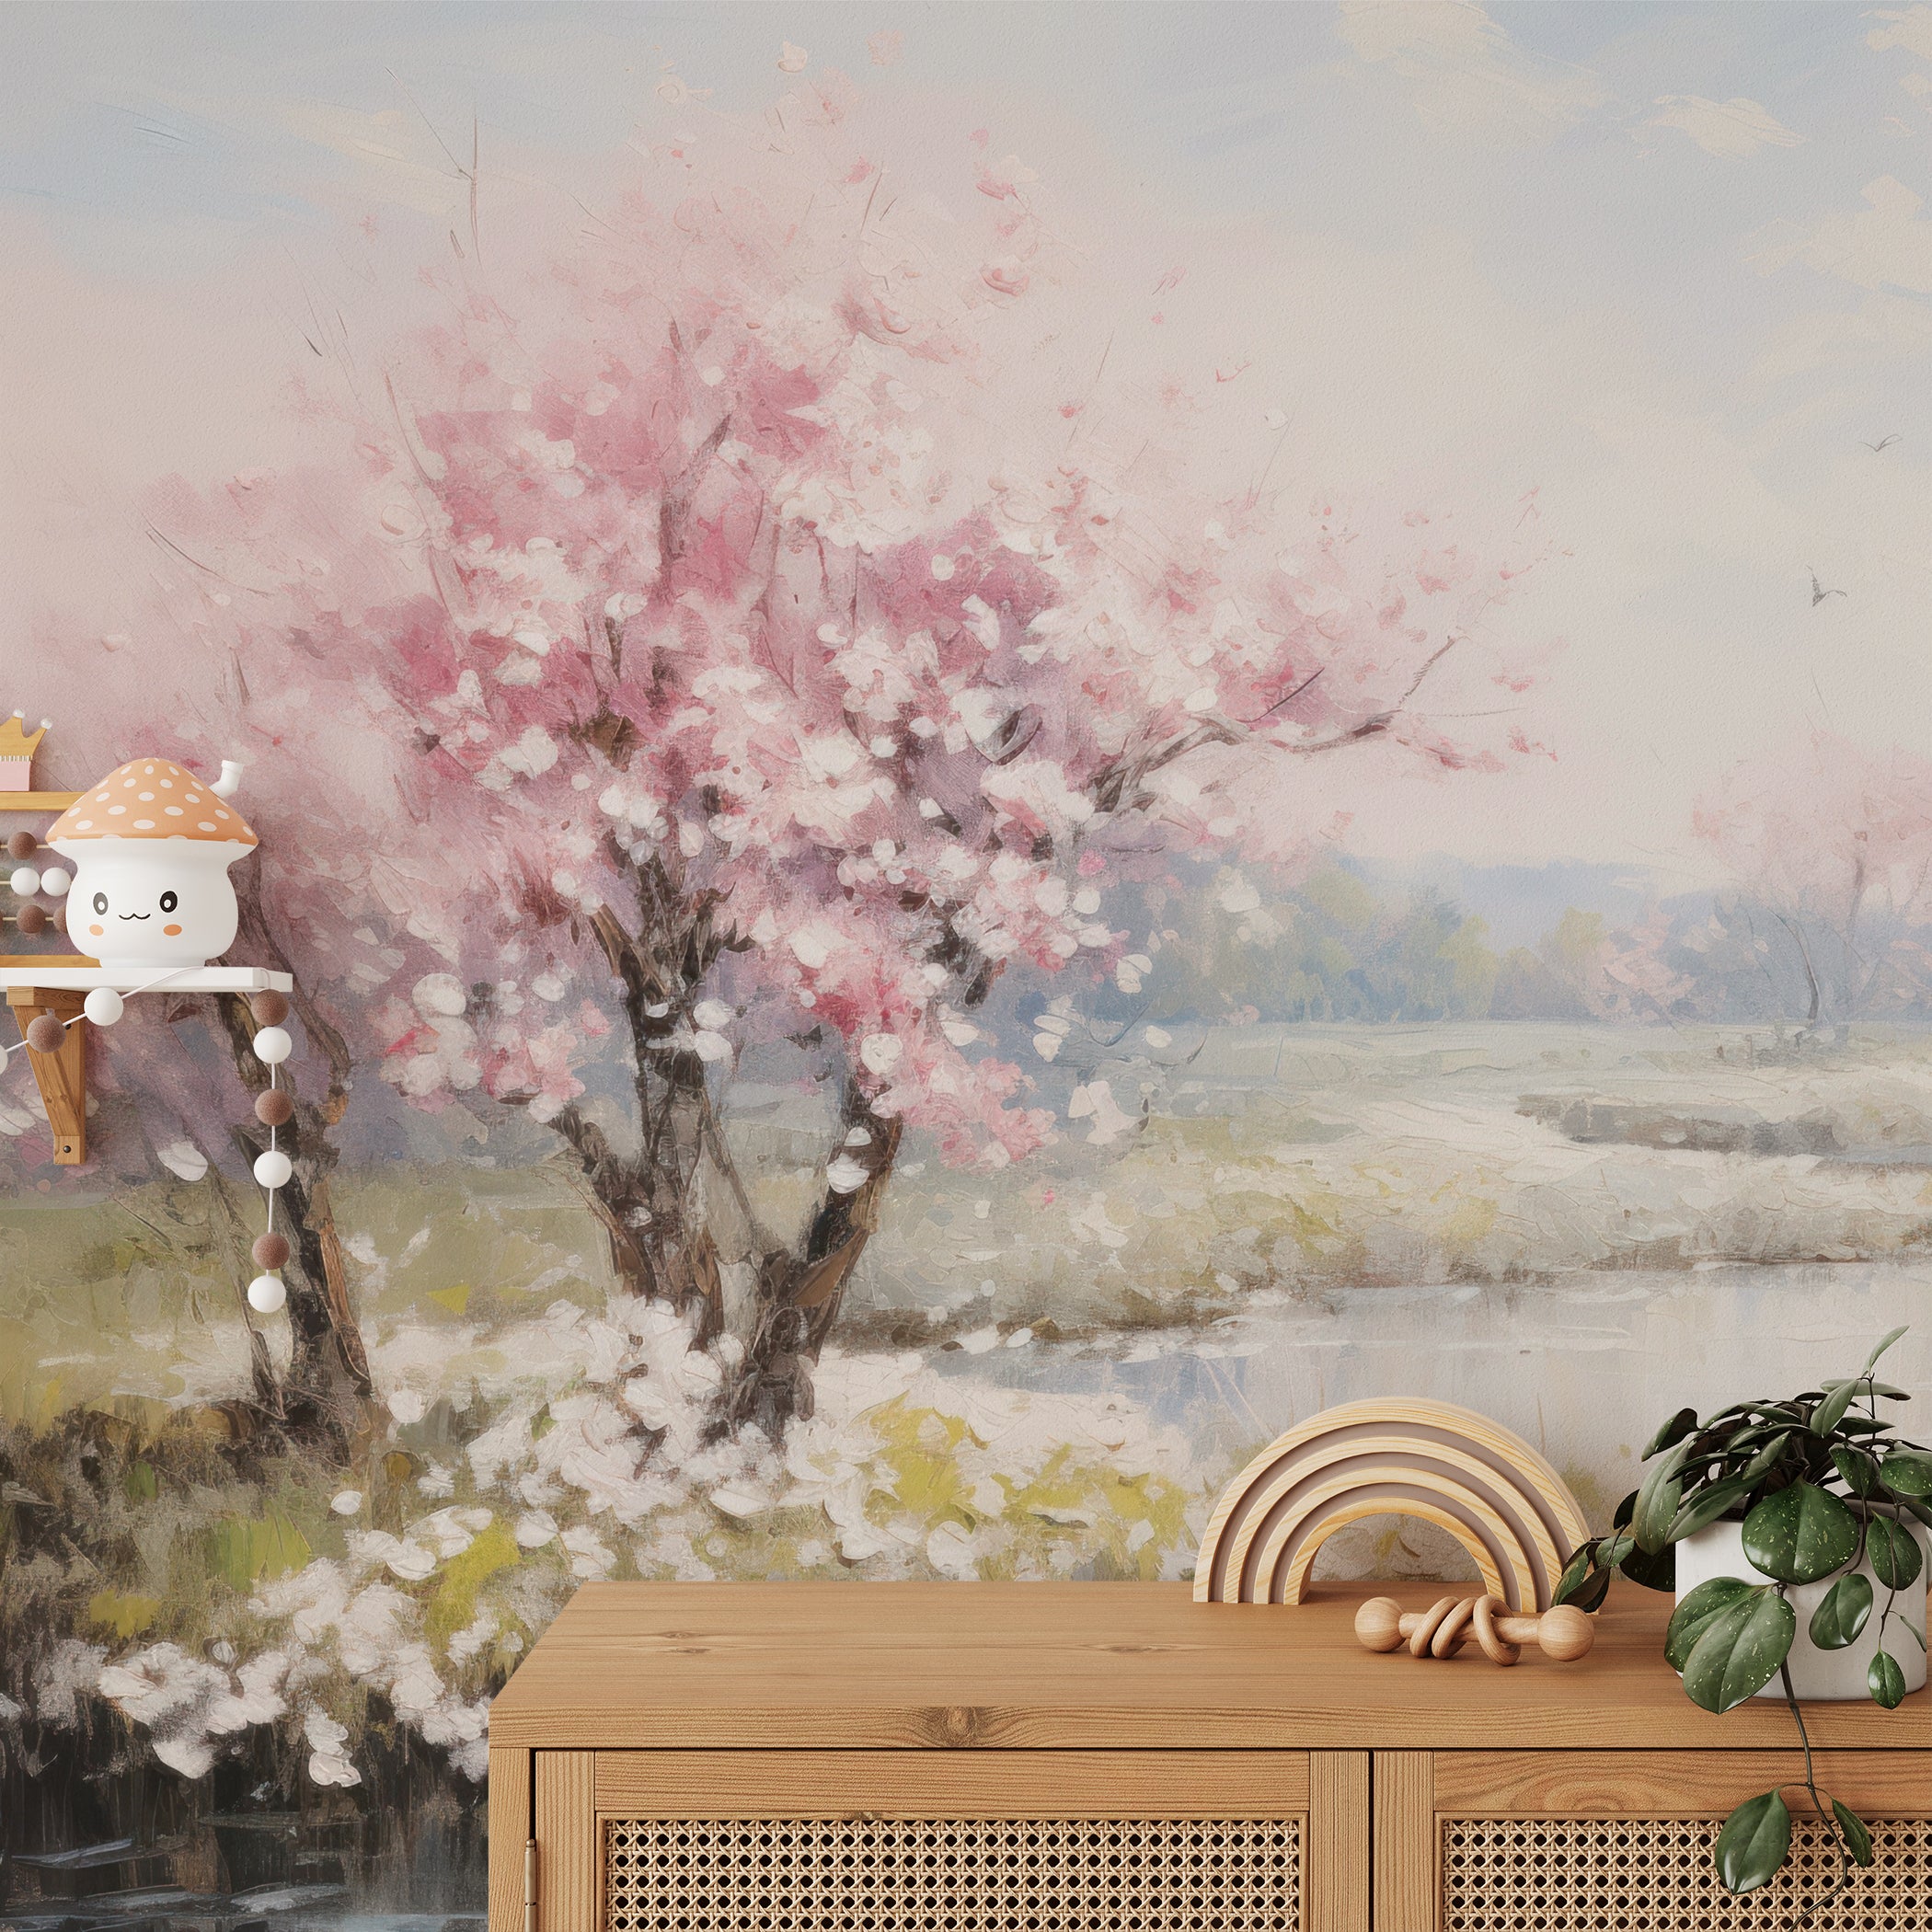 Close-up of Cherry Lake Mural in a room setting, highlighting the detailed pink cherry blossoms and serene lakeside scenery.